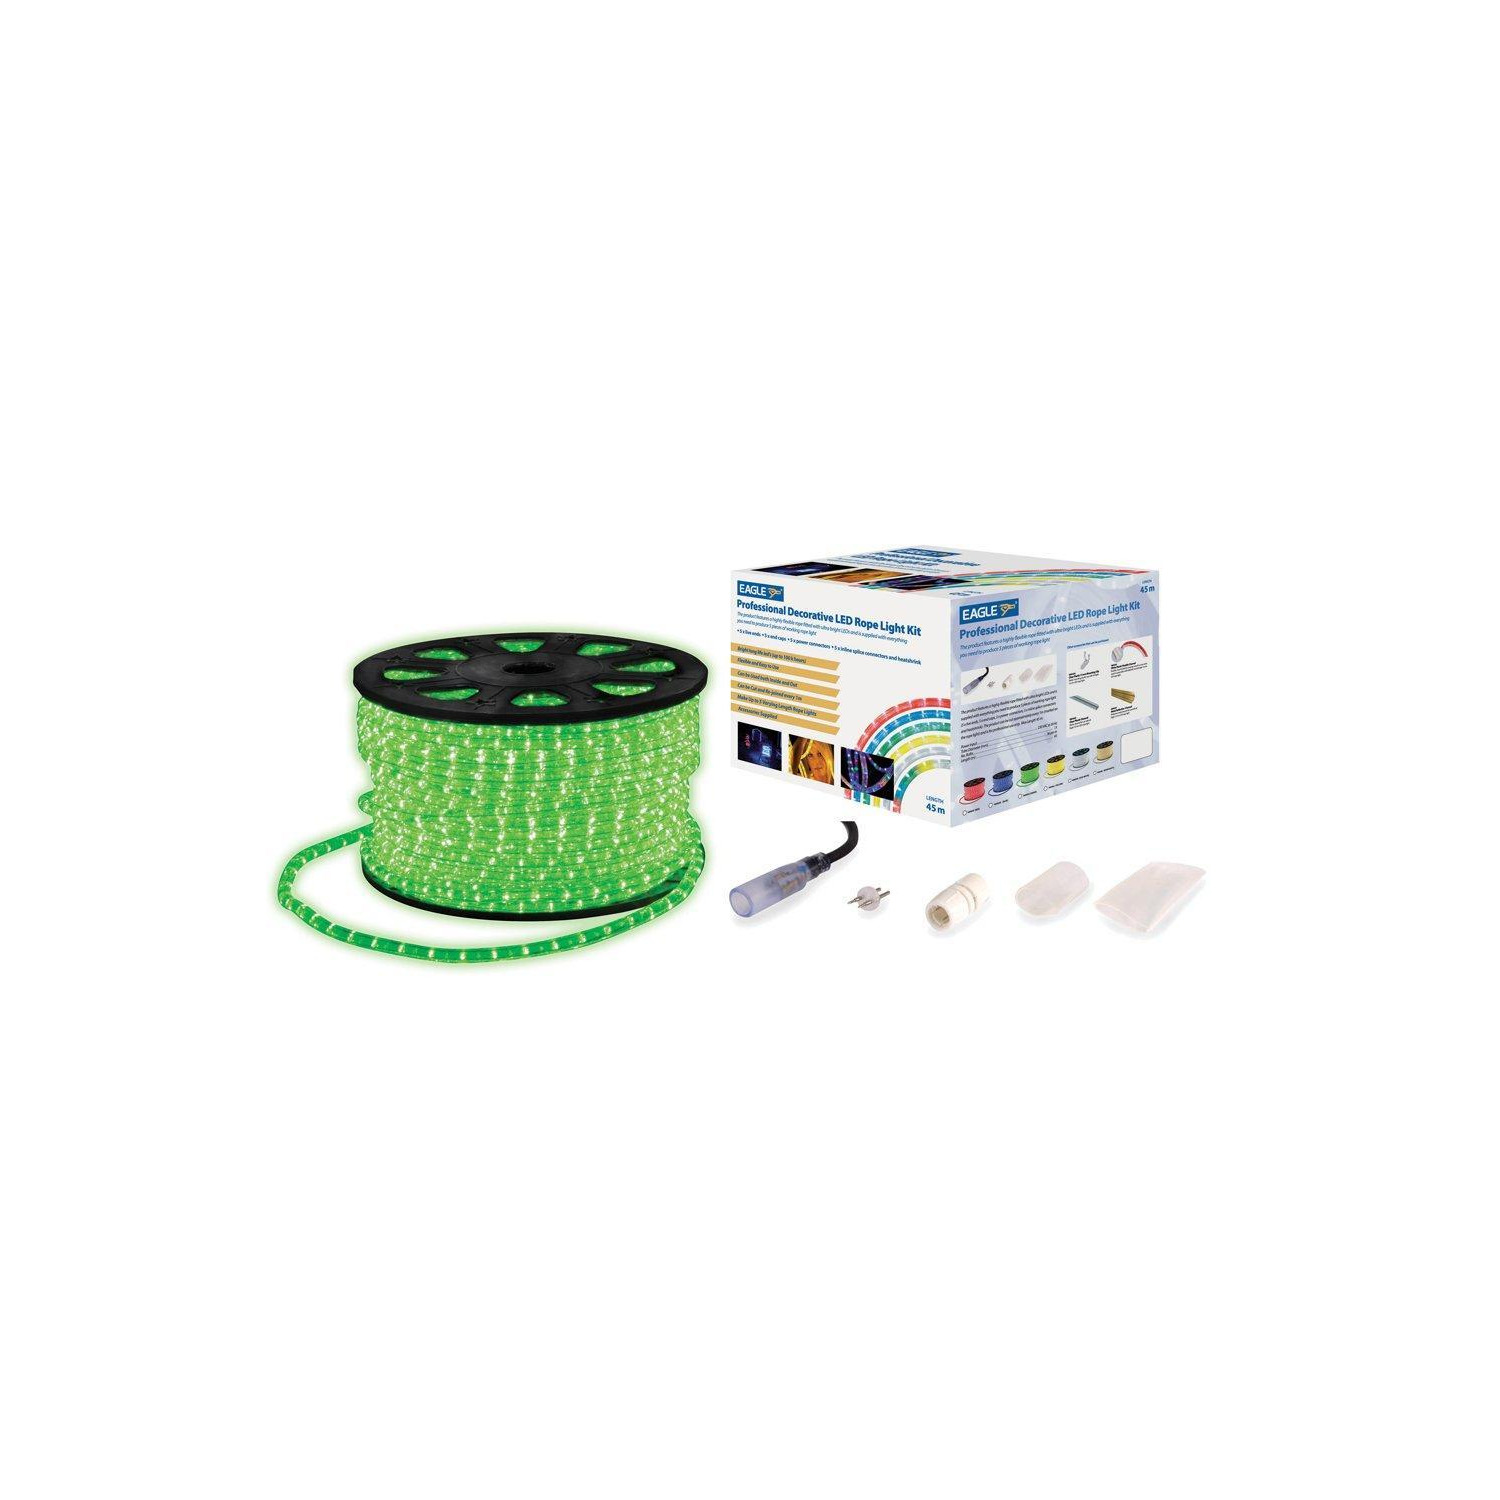 Static LED Rope Light Kit With Wiring Accessories Kit 45m Green - image 1